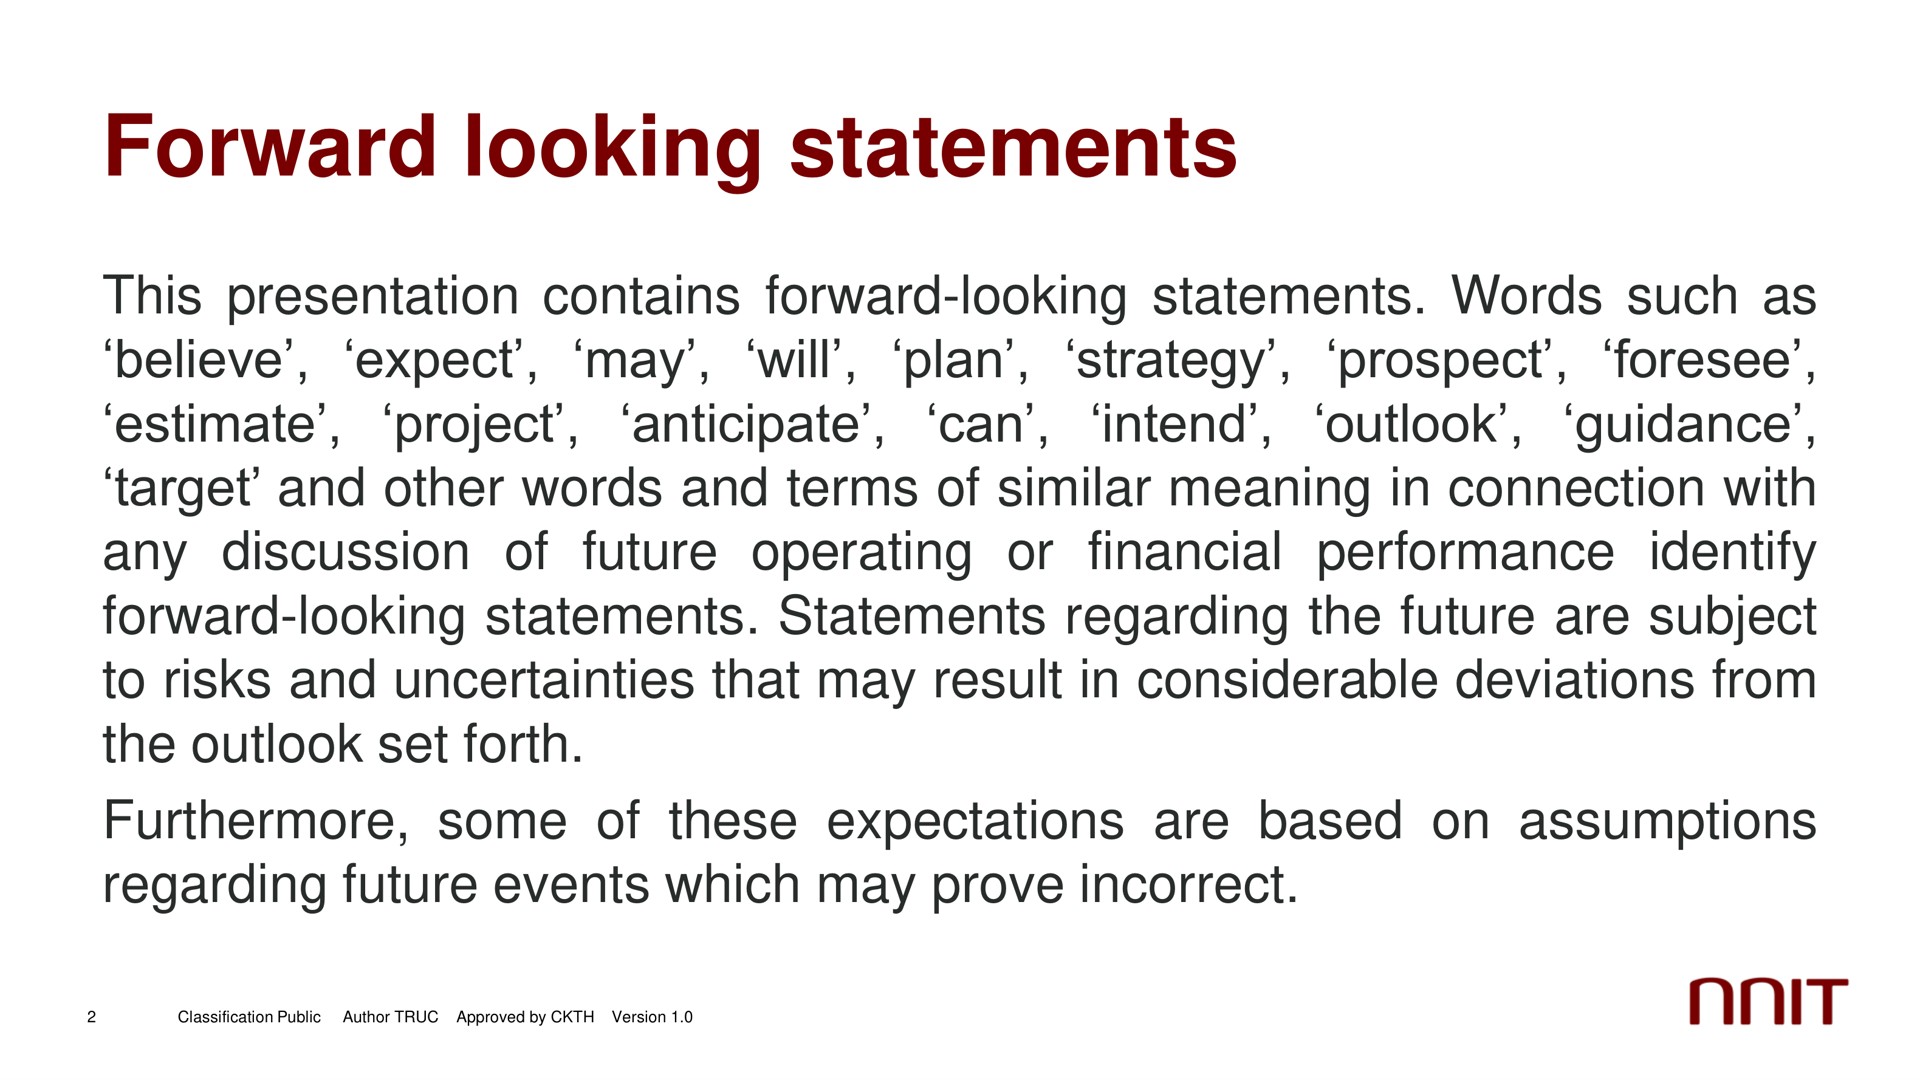 forward looking statements this presentation contains forward looking statements words such as believe expect may will plan strategy prospect foresee estimate project anticipate can intend outlook guidance target and other words and terms of similar meaning in connection with any discussion of future operating or financial performance identify forward looking statements statements regarding the future are subject to risks and uncertainties that may result in considerable deviations from the outlook set forth furthermore some of these expectations are based on assumptions regarding future events which may prove incorrect | NNIT